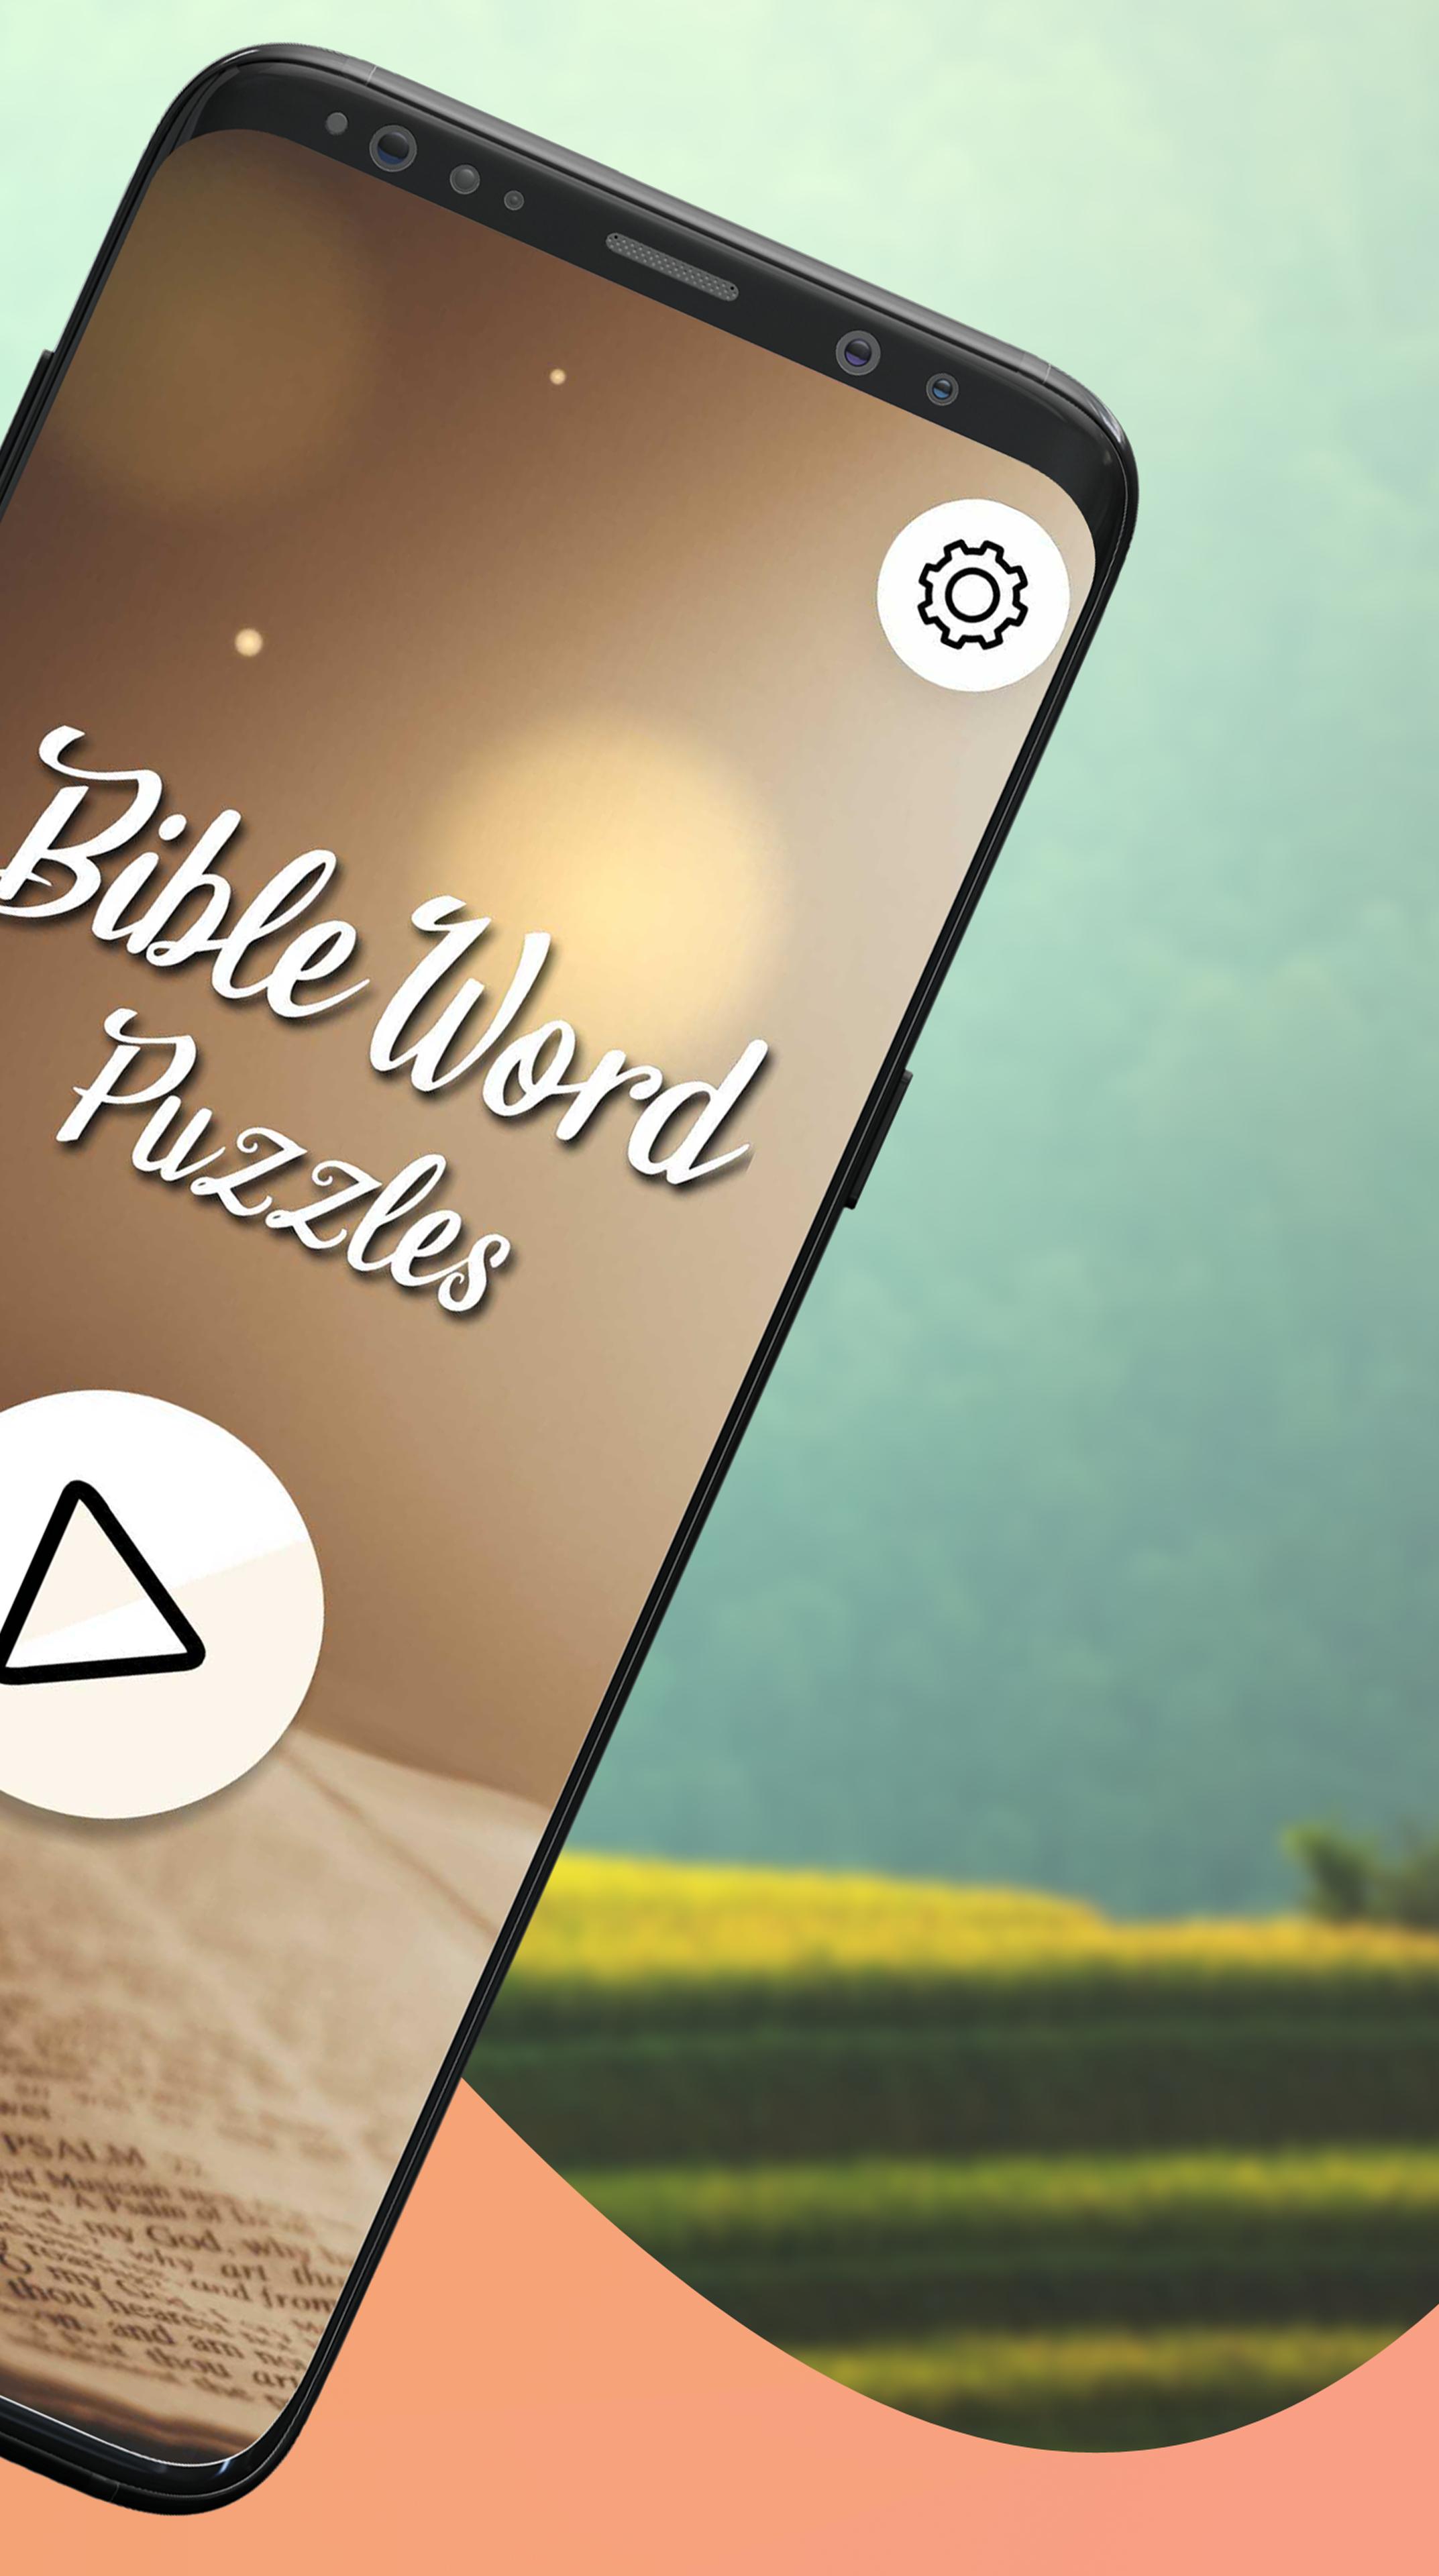 Bible Word Puzzle Games: Verse Search & Cross Word 4.5 Screenshot 18